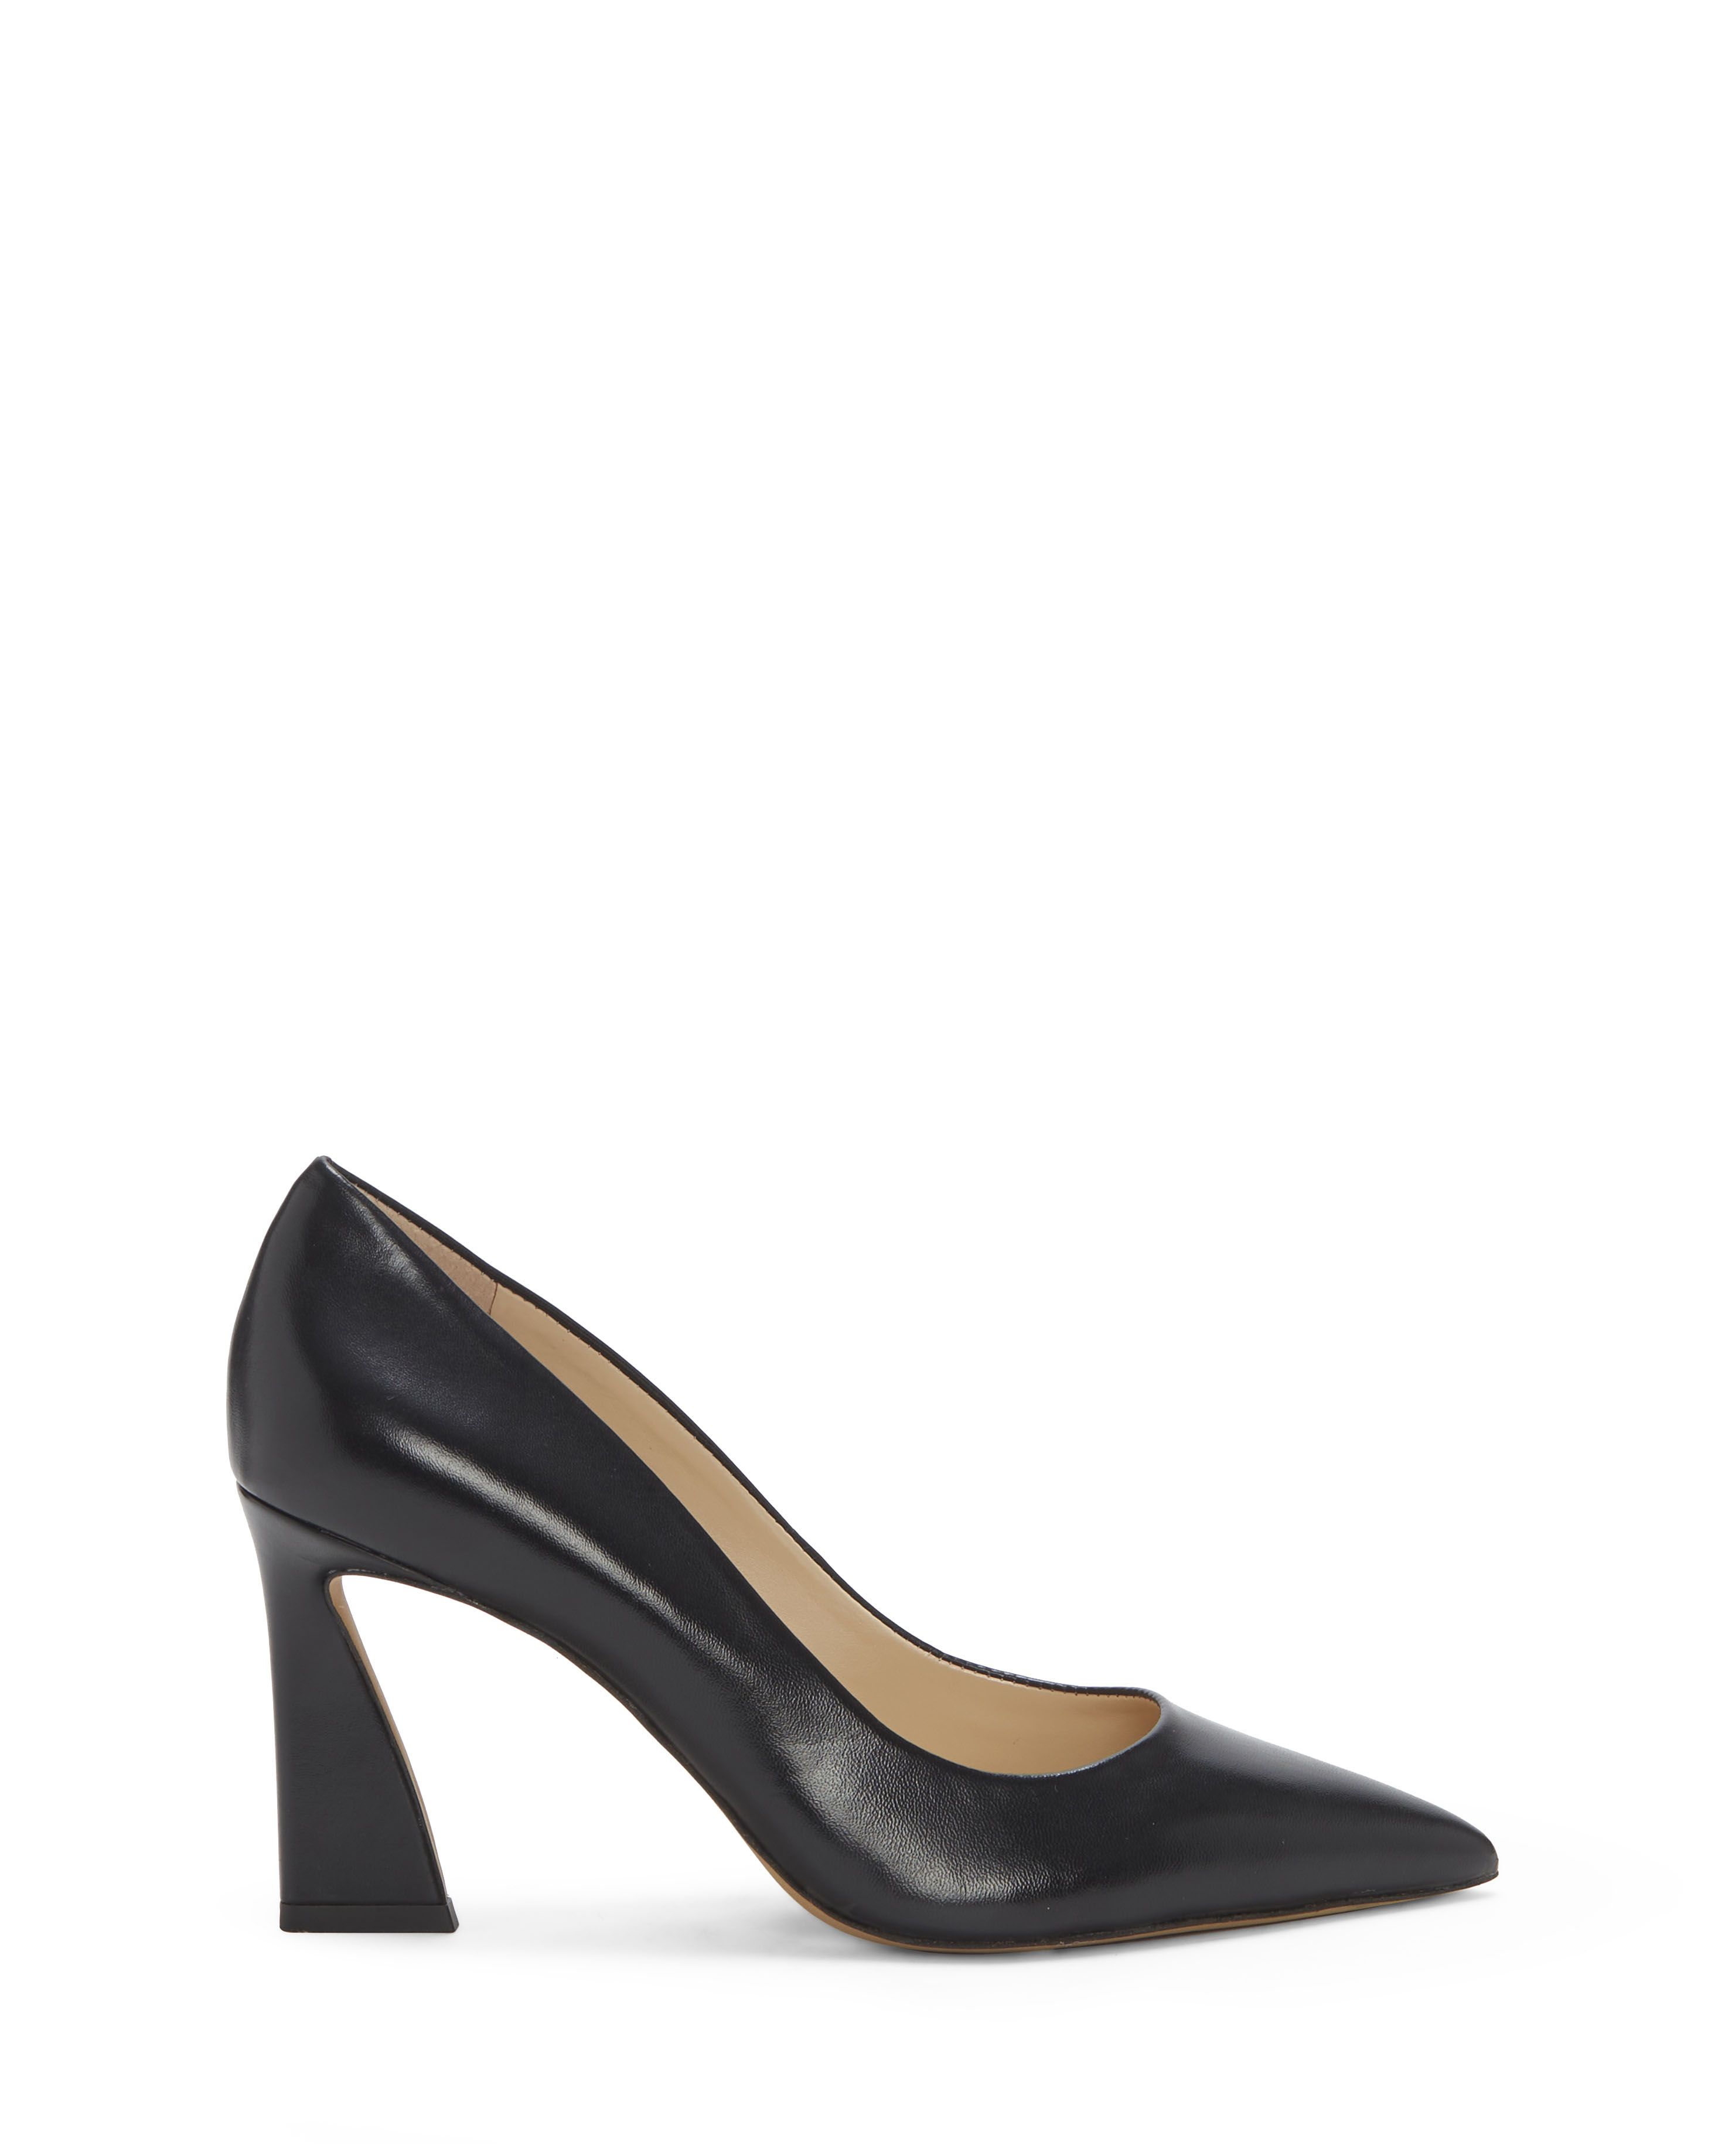 Thanley Point-Toe Pump | Vince Camuto